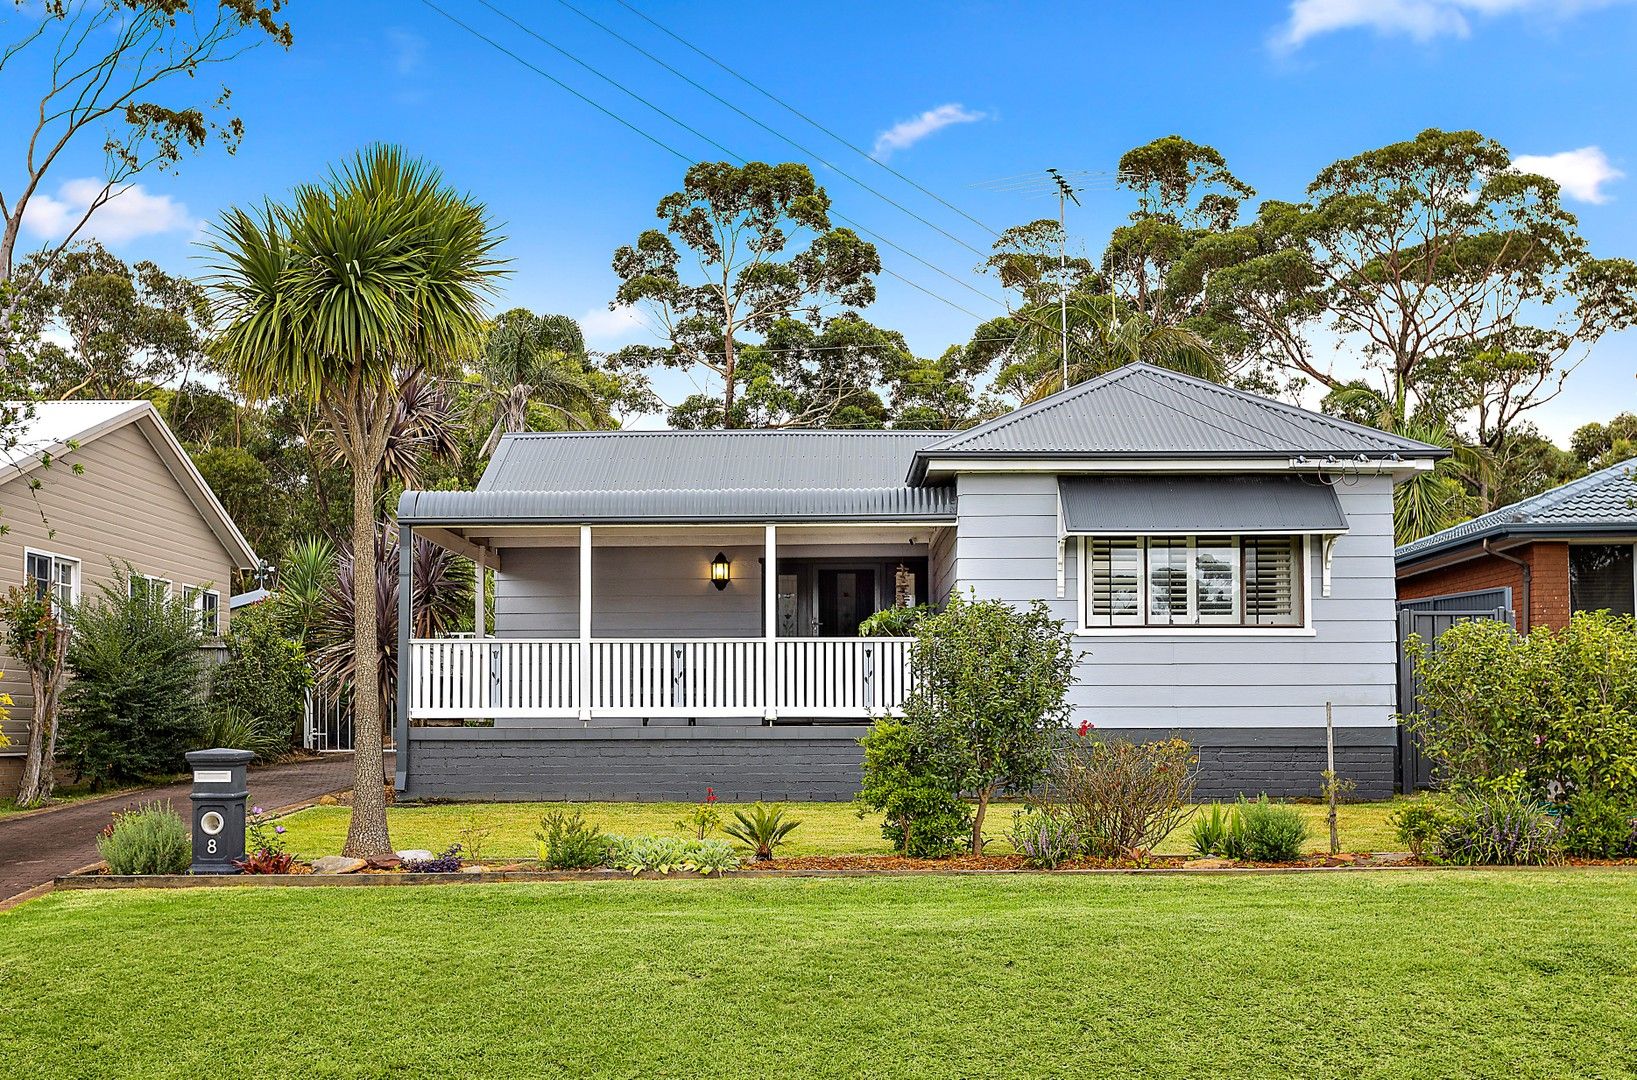 8 Annesley Avenue, Stanwell Tops NSW 2508, Image 0